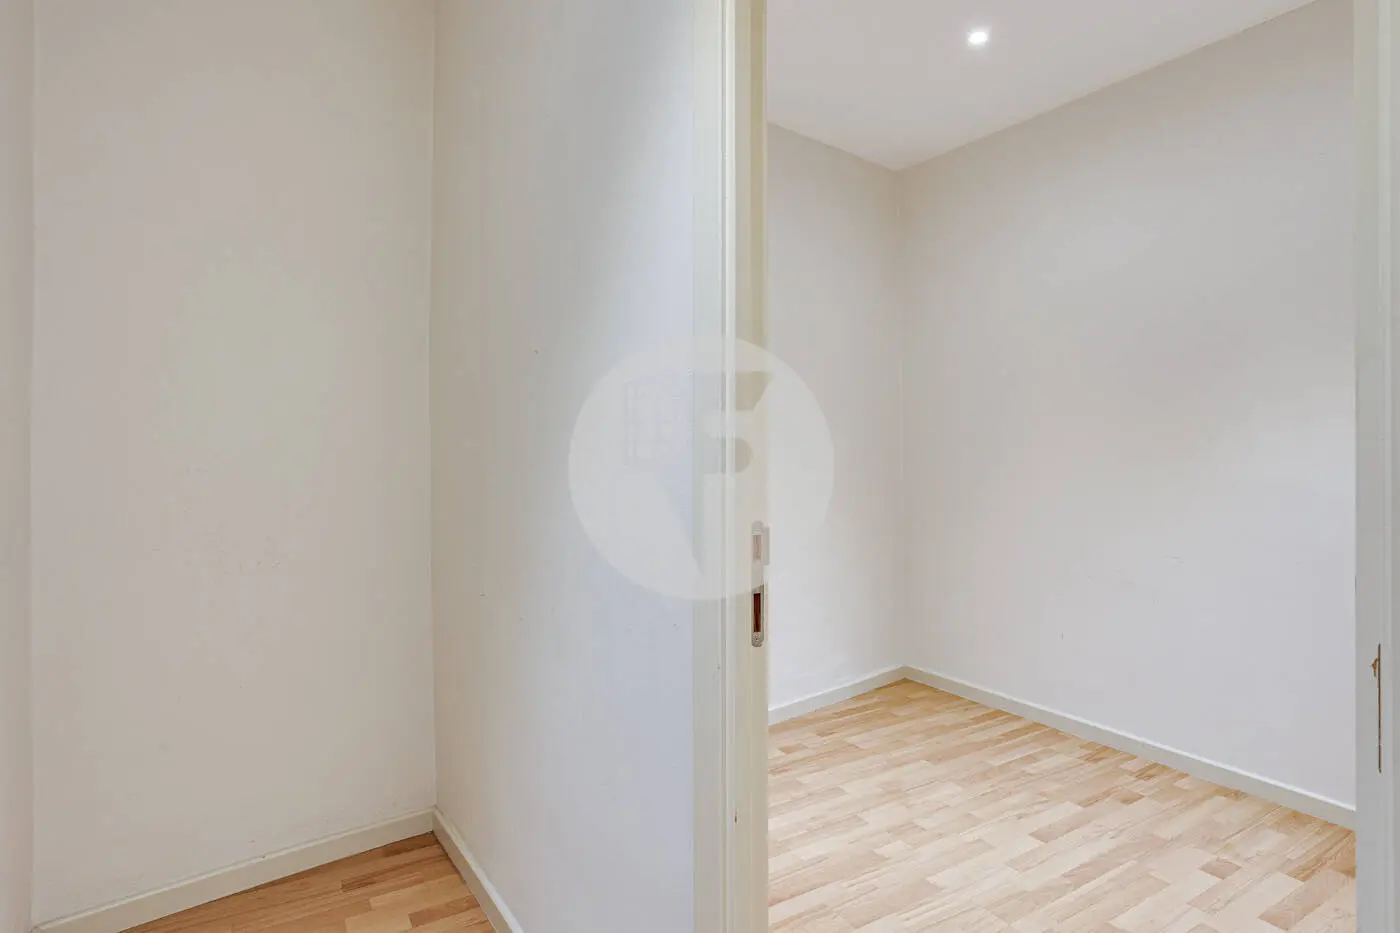 Magnificent apartment for sale next to Pl Universitat of 114m2 according to the land registry, located on Tallers Street in the Ciutat Vella neighborhood of Barcelona 13